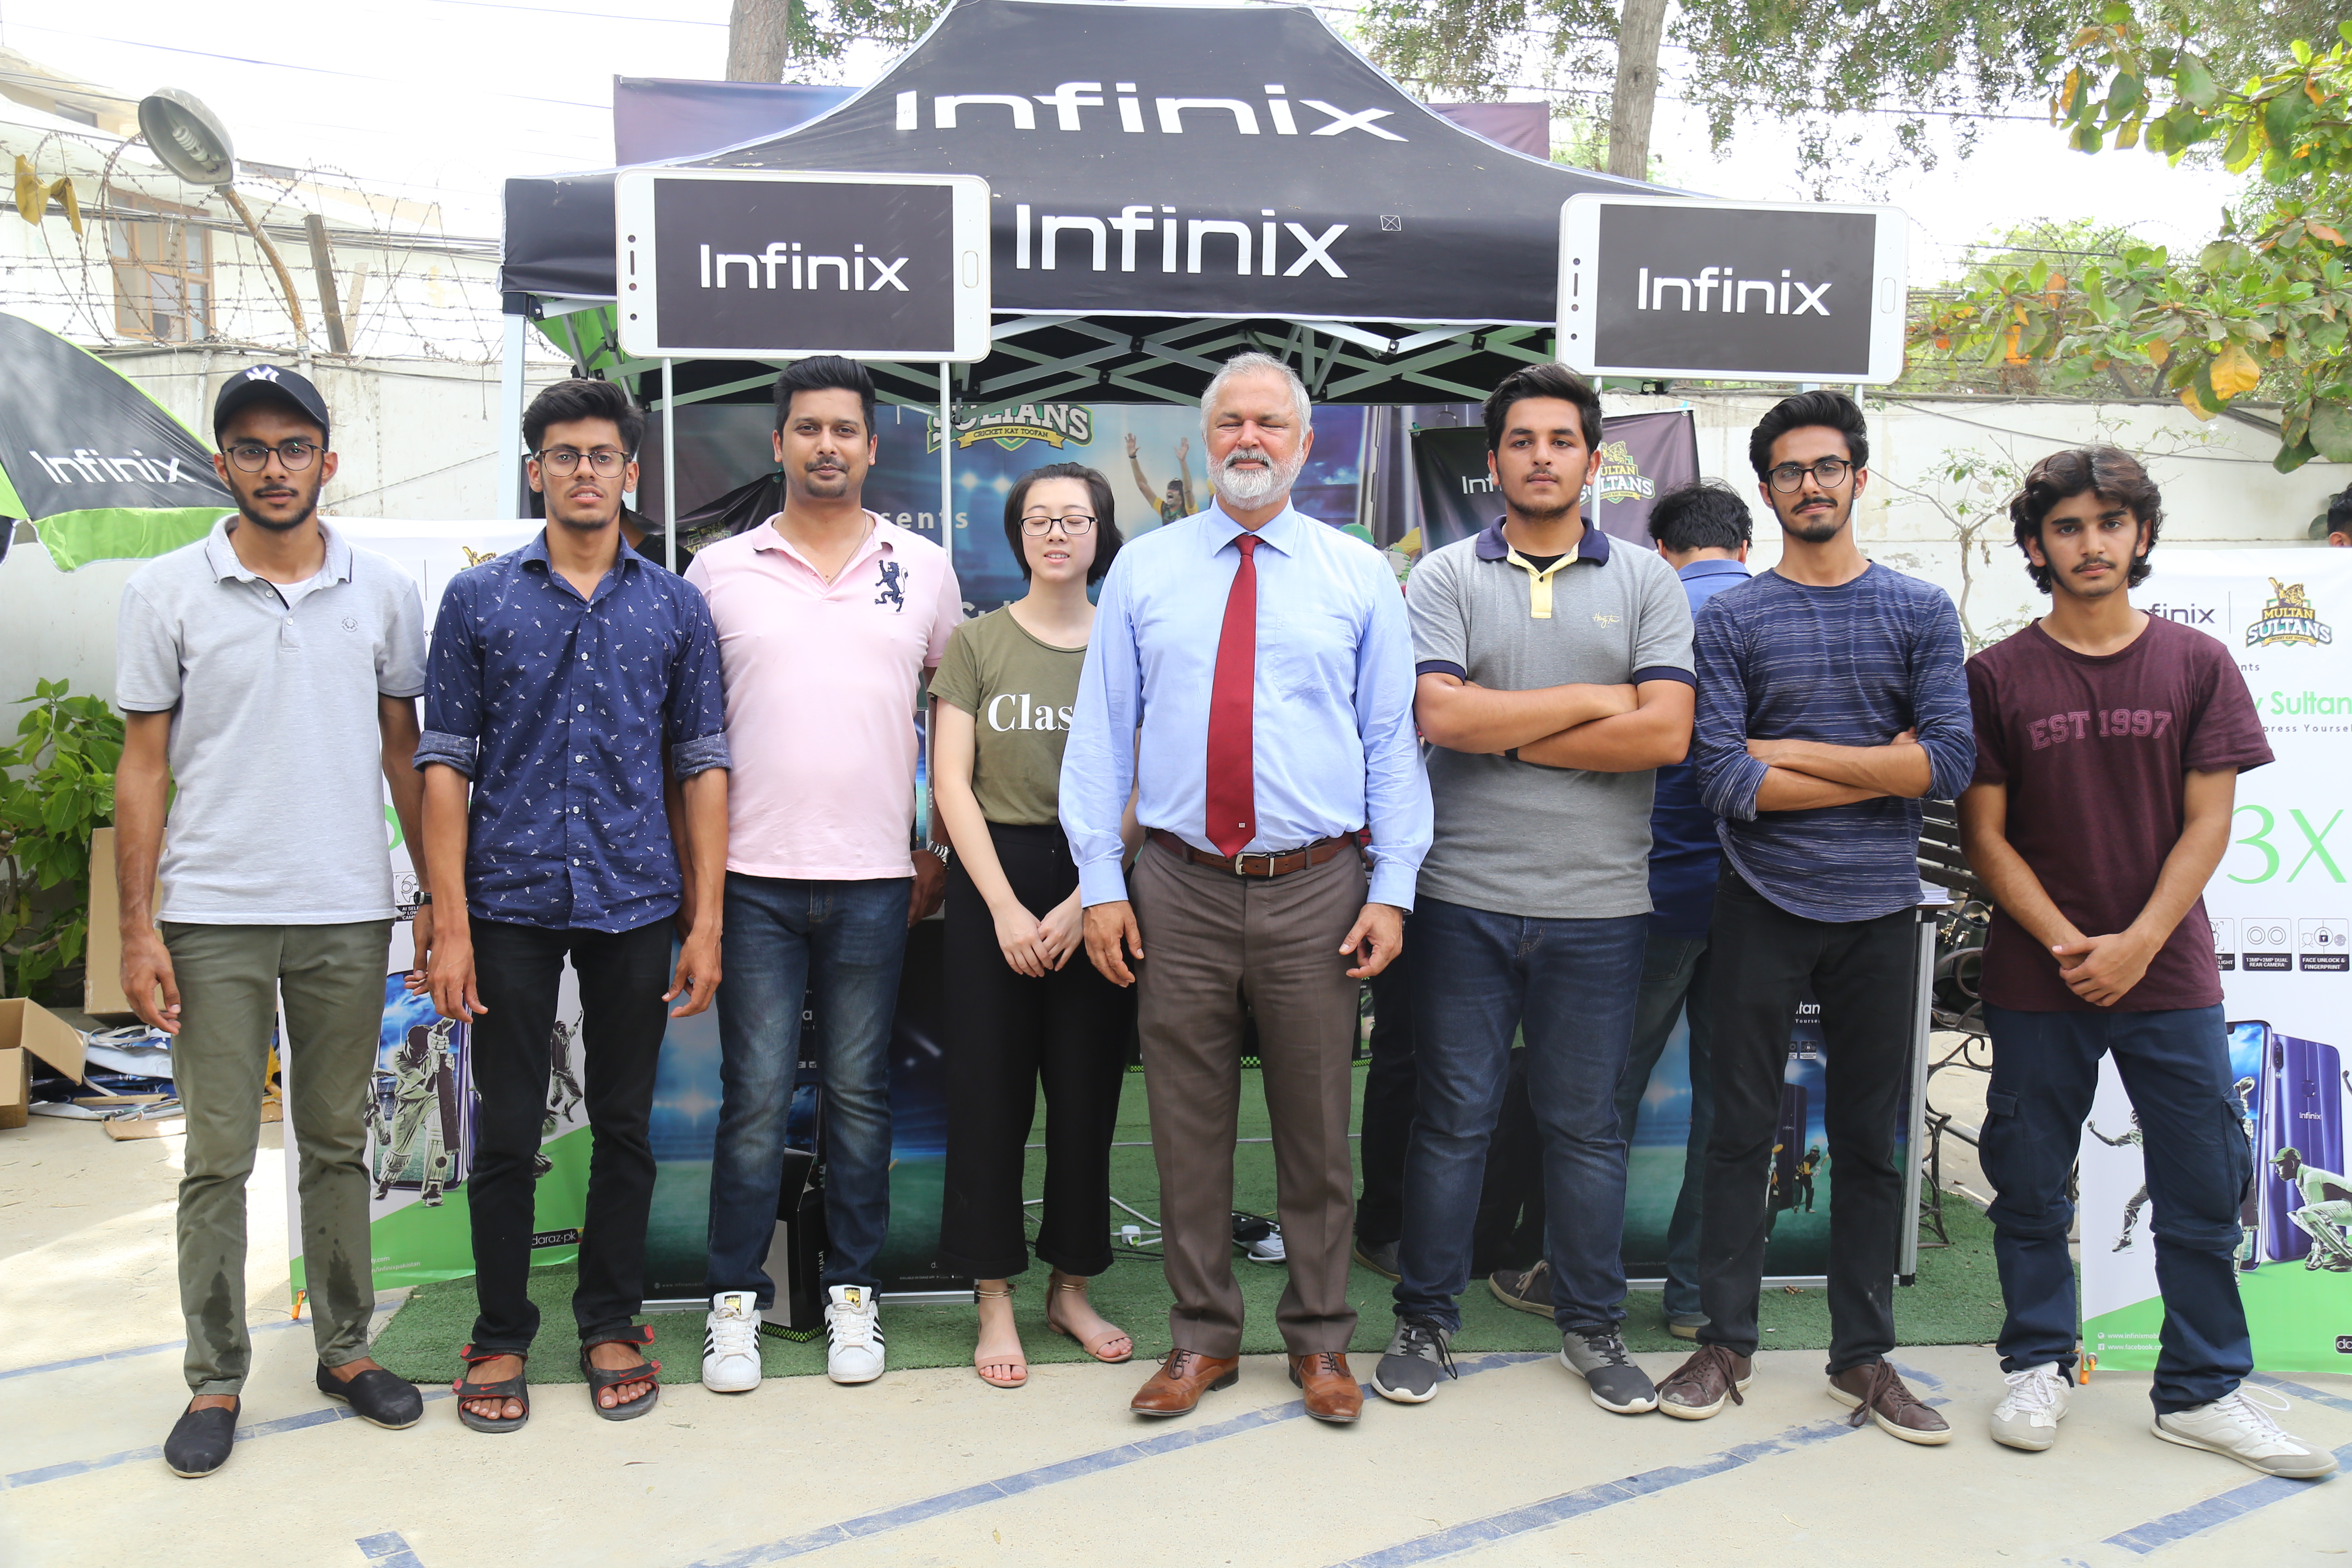 ‘INFINIX KAY SULTANS’ REACHES KARACHI BIGGER AND BETTER THAN EVER